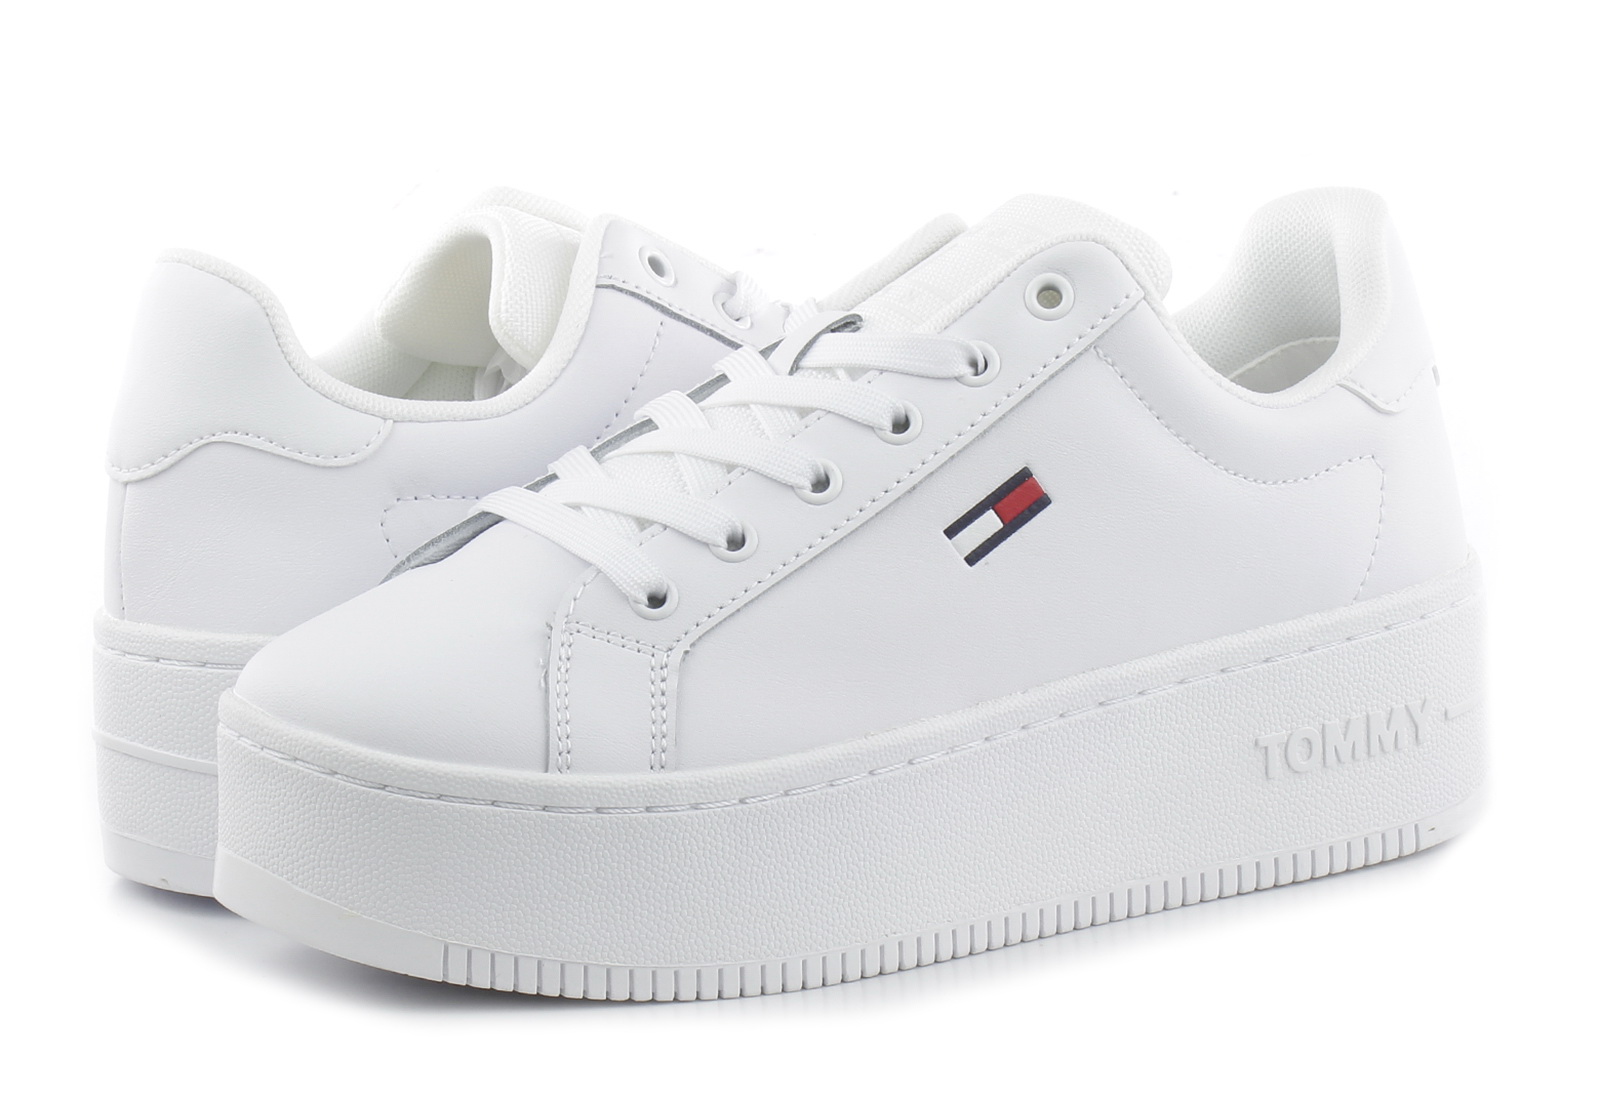 Tommy Hilfiger Trainers - New Roxy 4A8 - EN0-2043-YBR - Online shop for  sneakers, shoes and boots